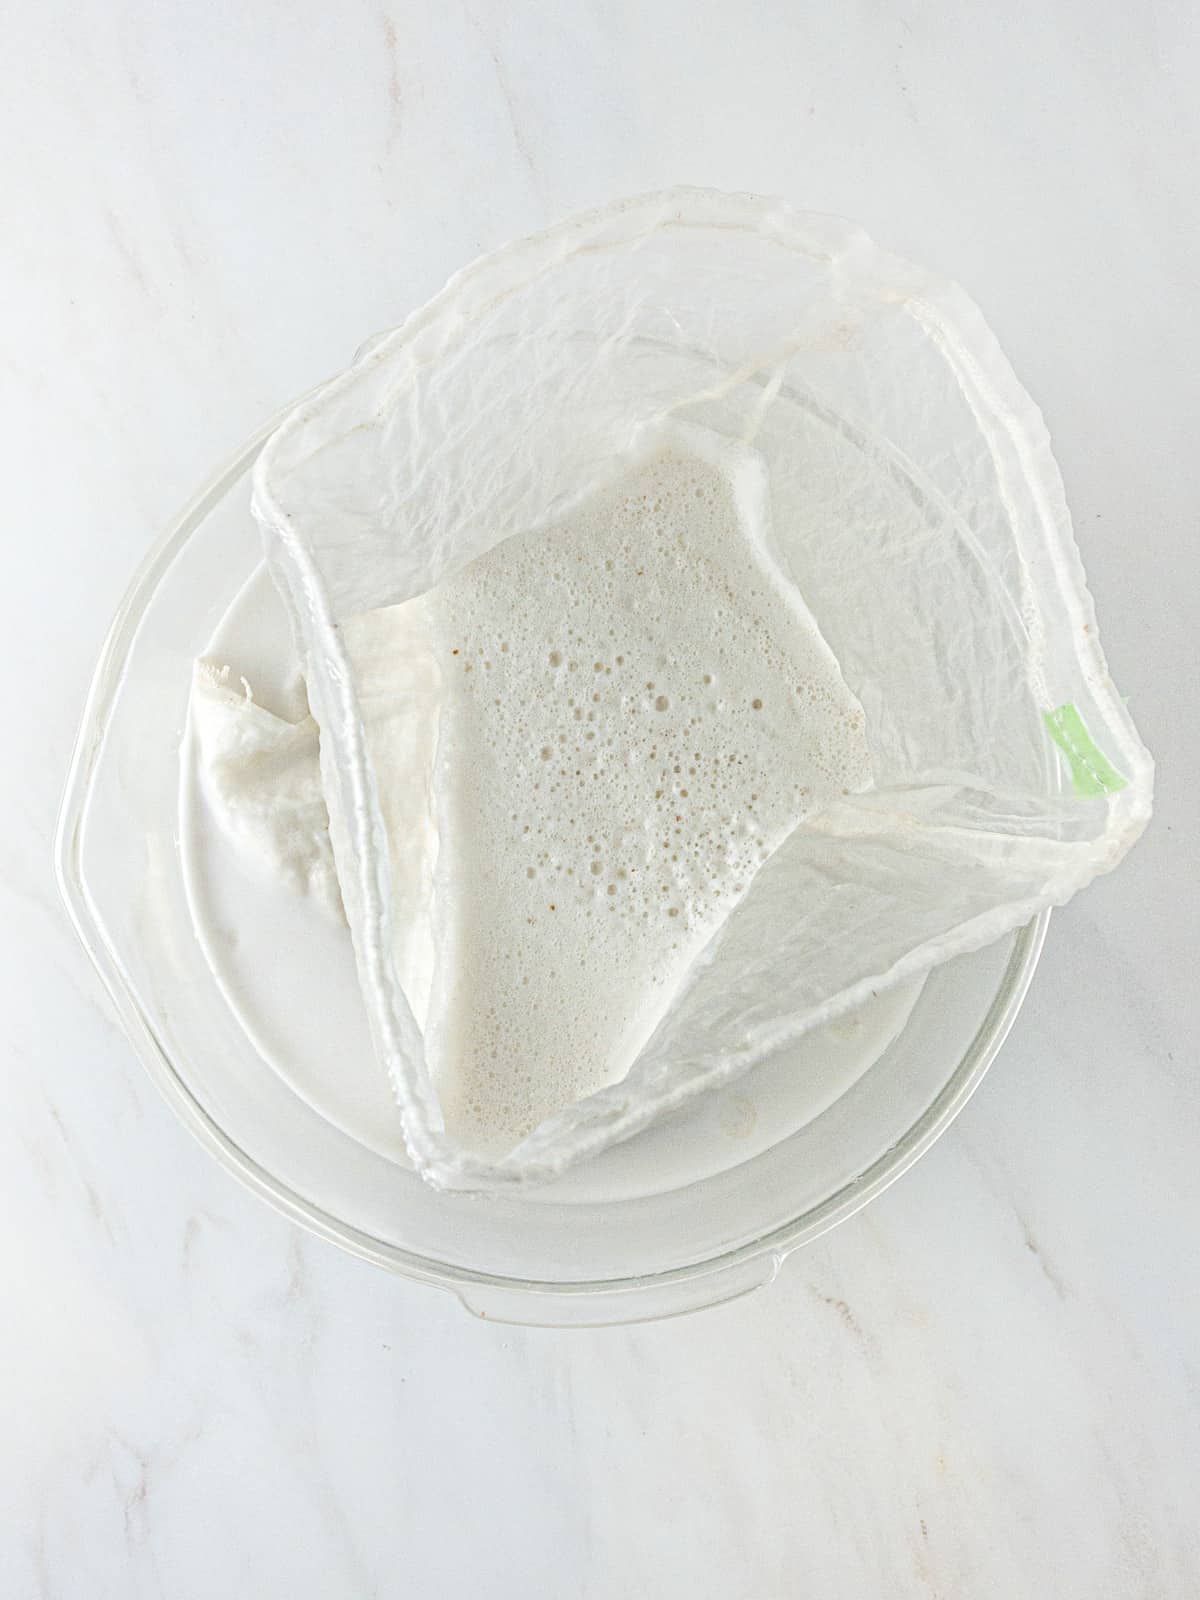 Homemade almond milk being strained through a nut milk bag in a large glass bowl.